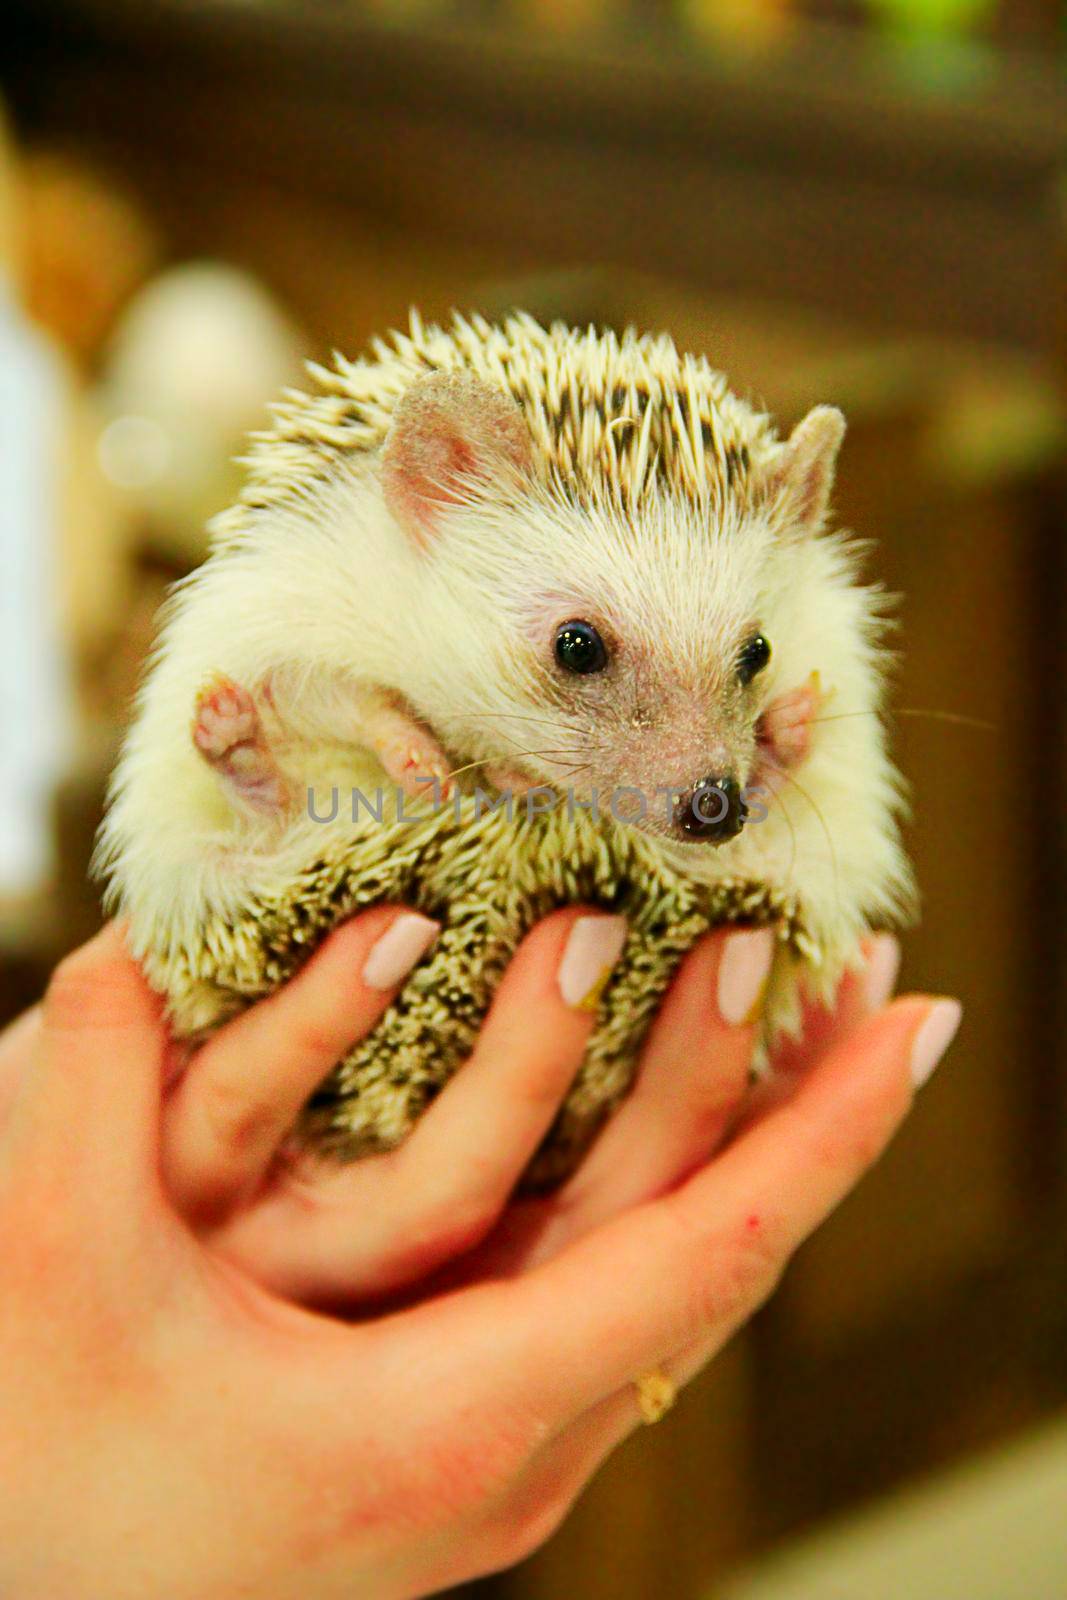 Small hedgehog in hands by alexmak